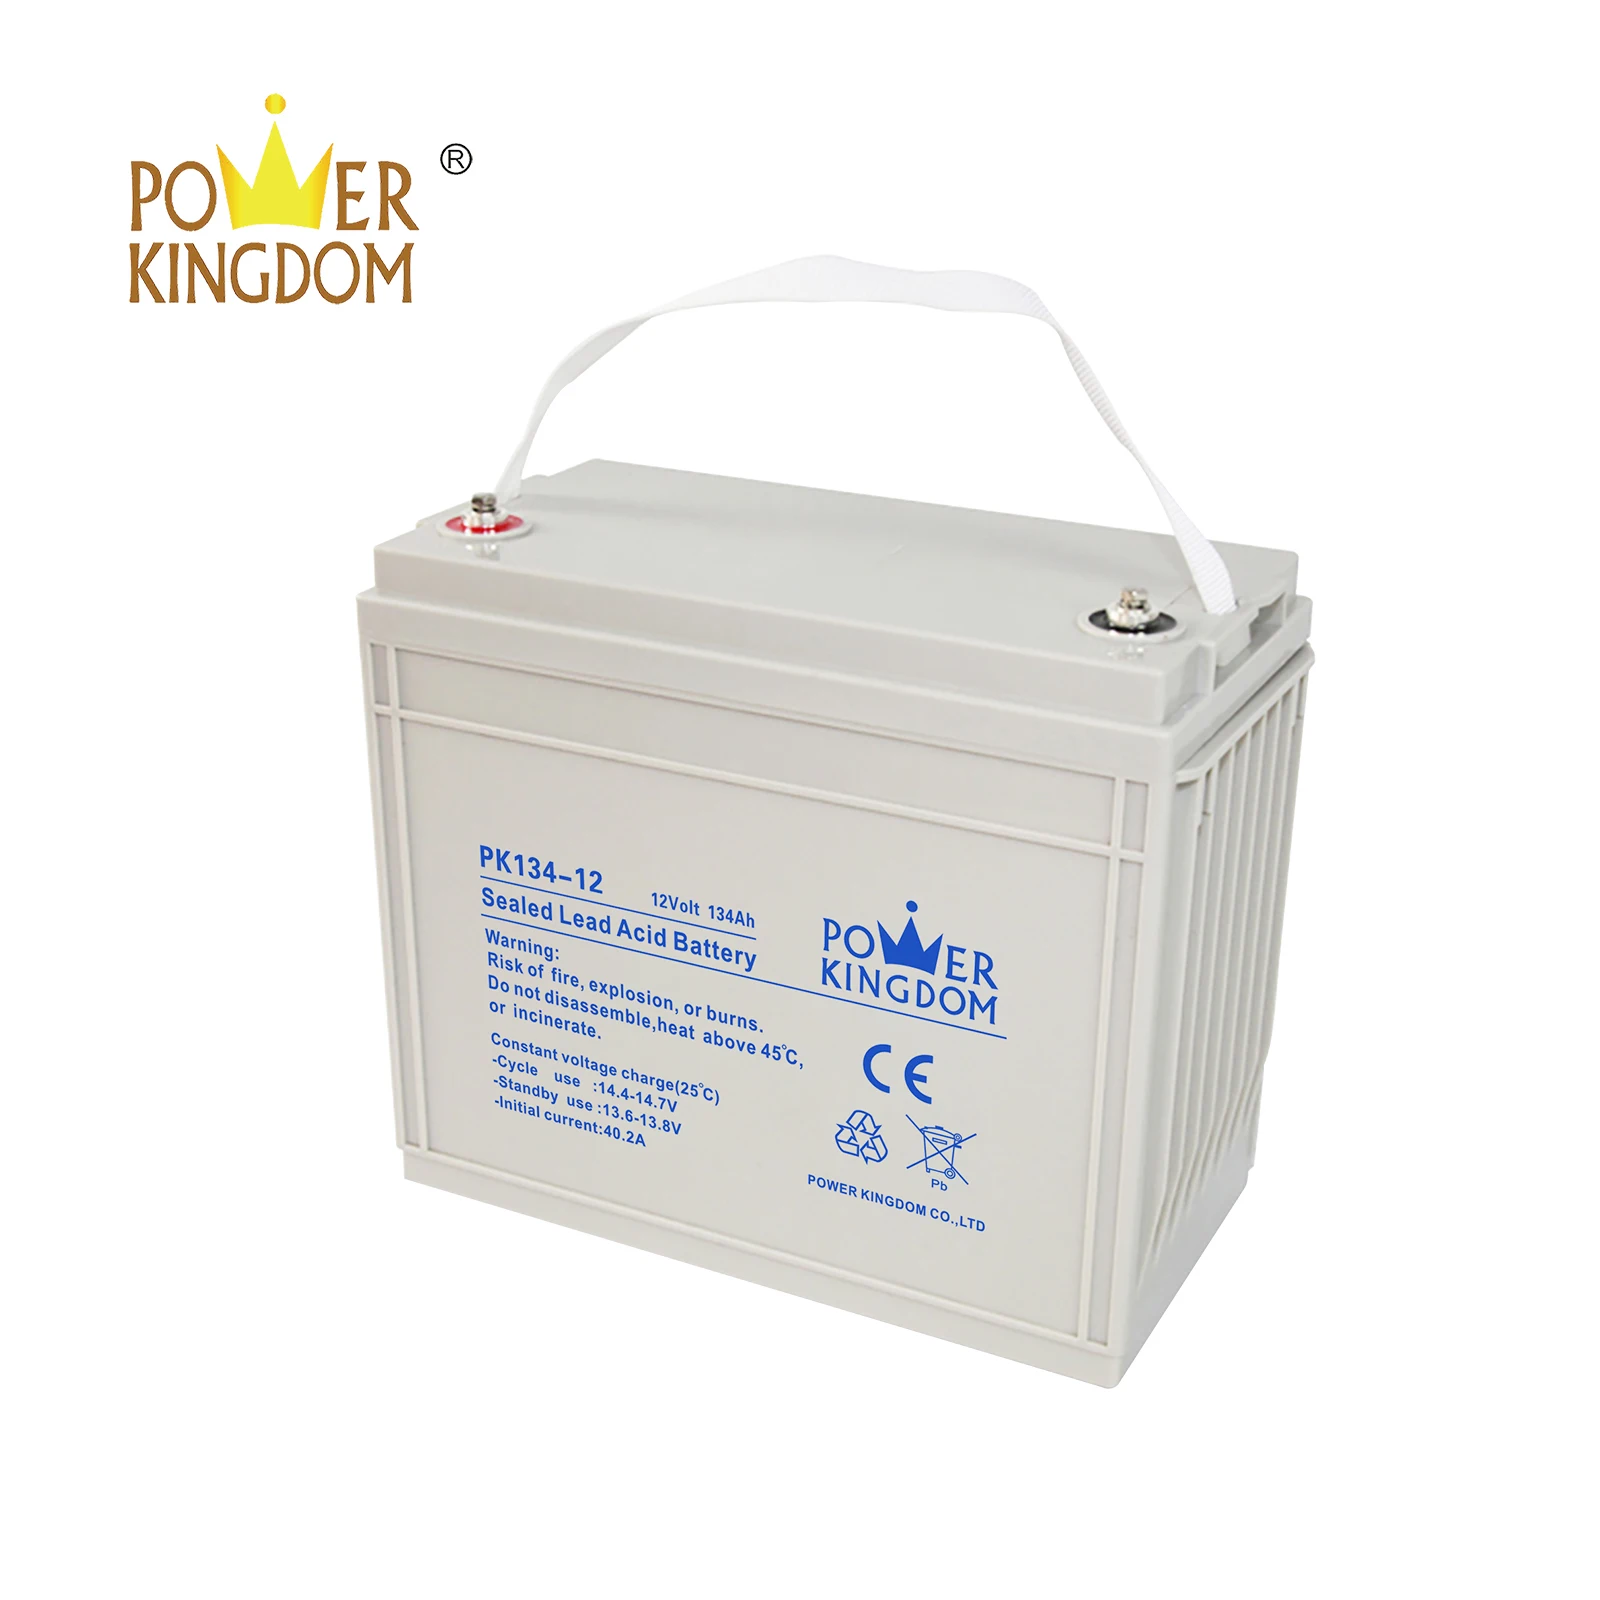 Power Kingdom deep cycle battery amp hours factory wind power systems